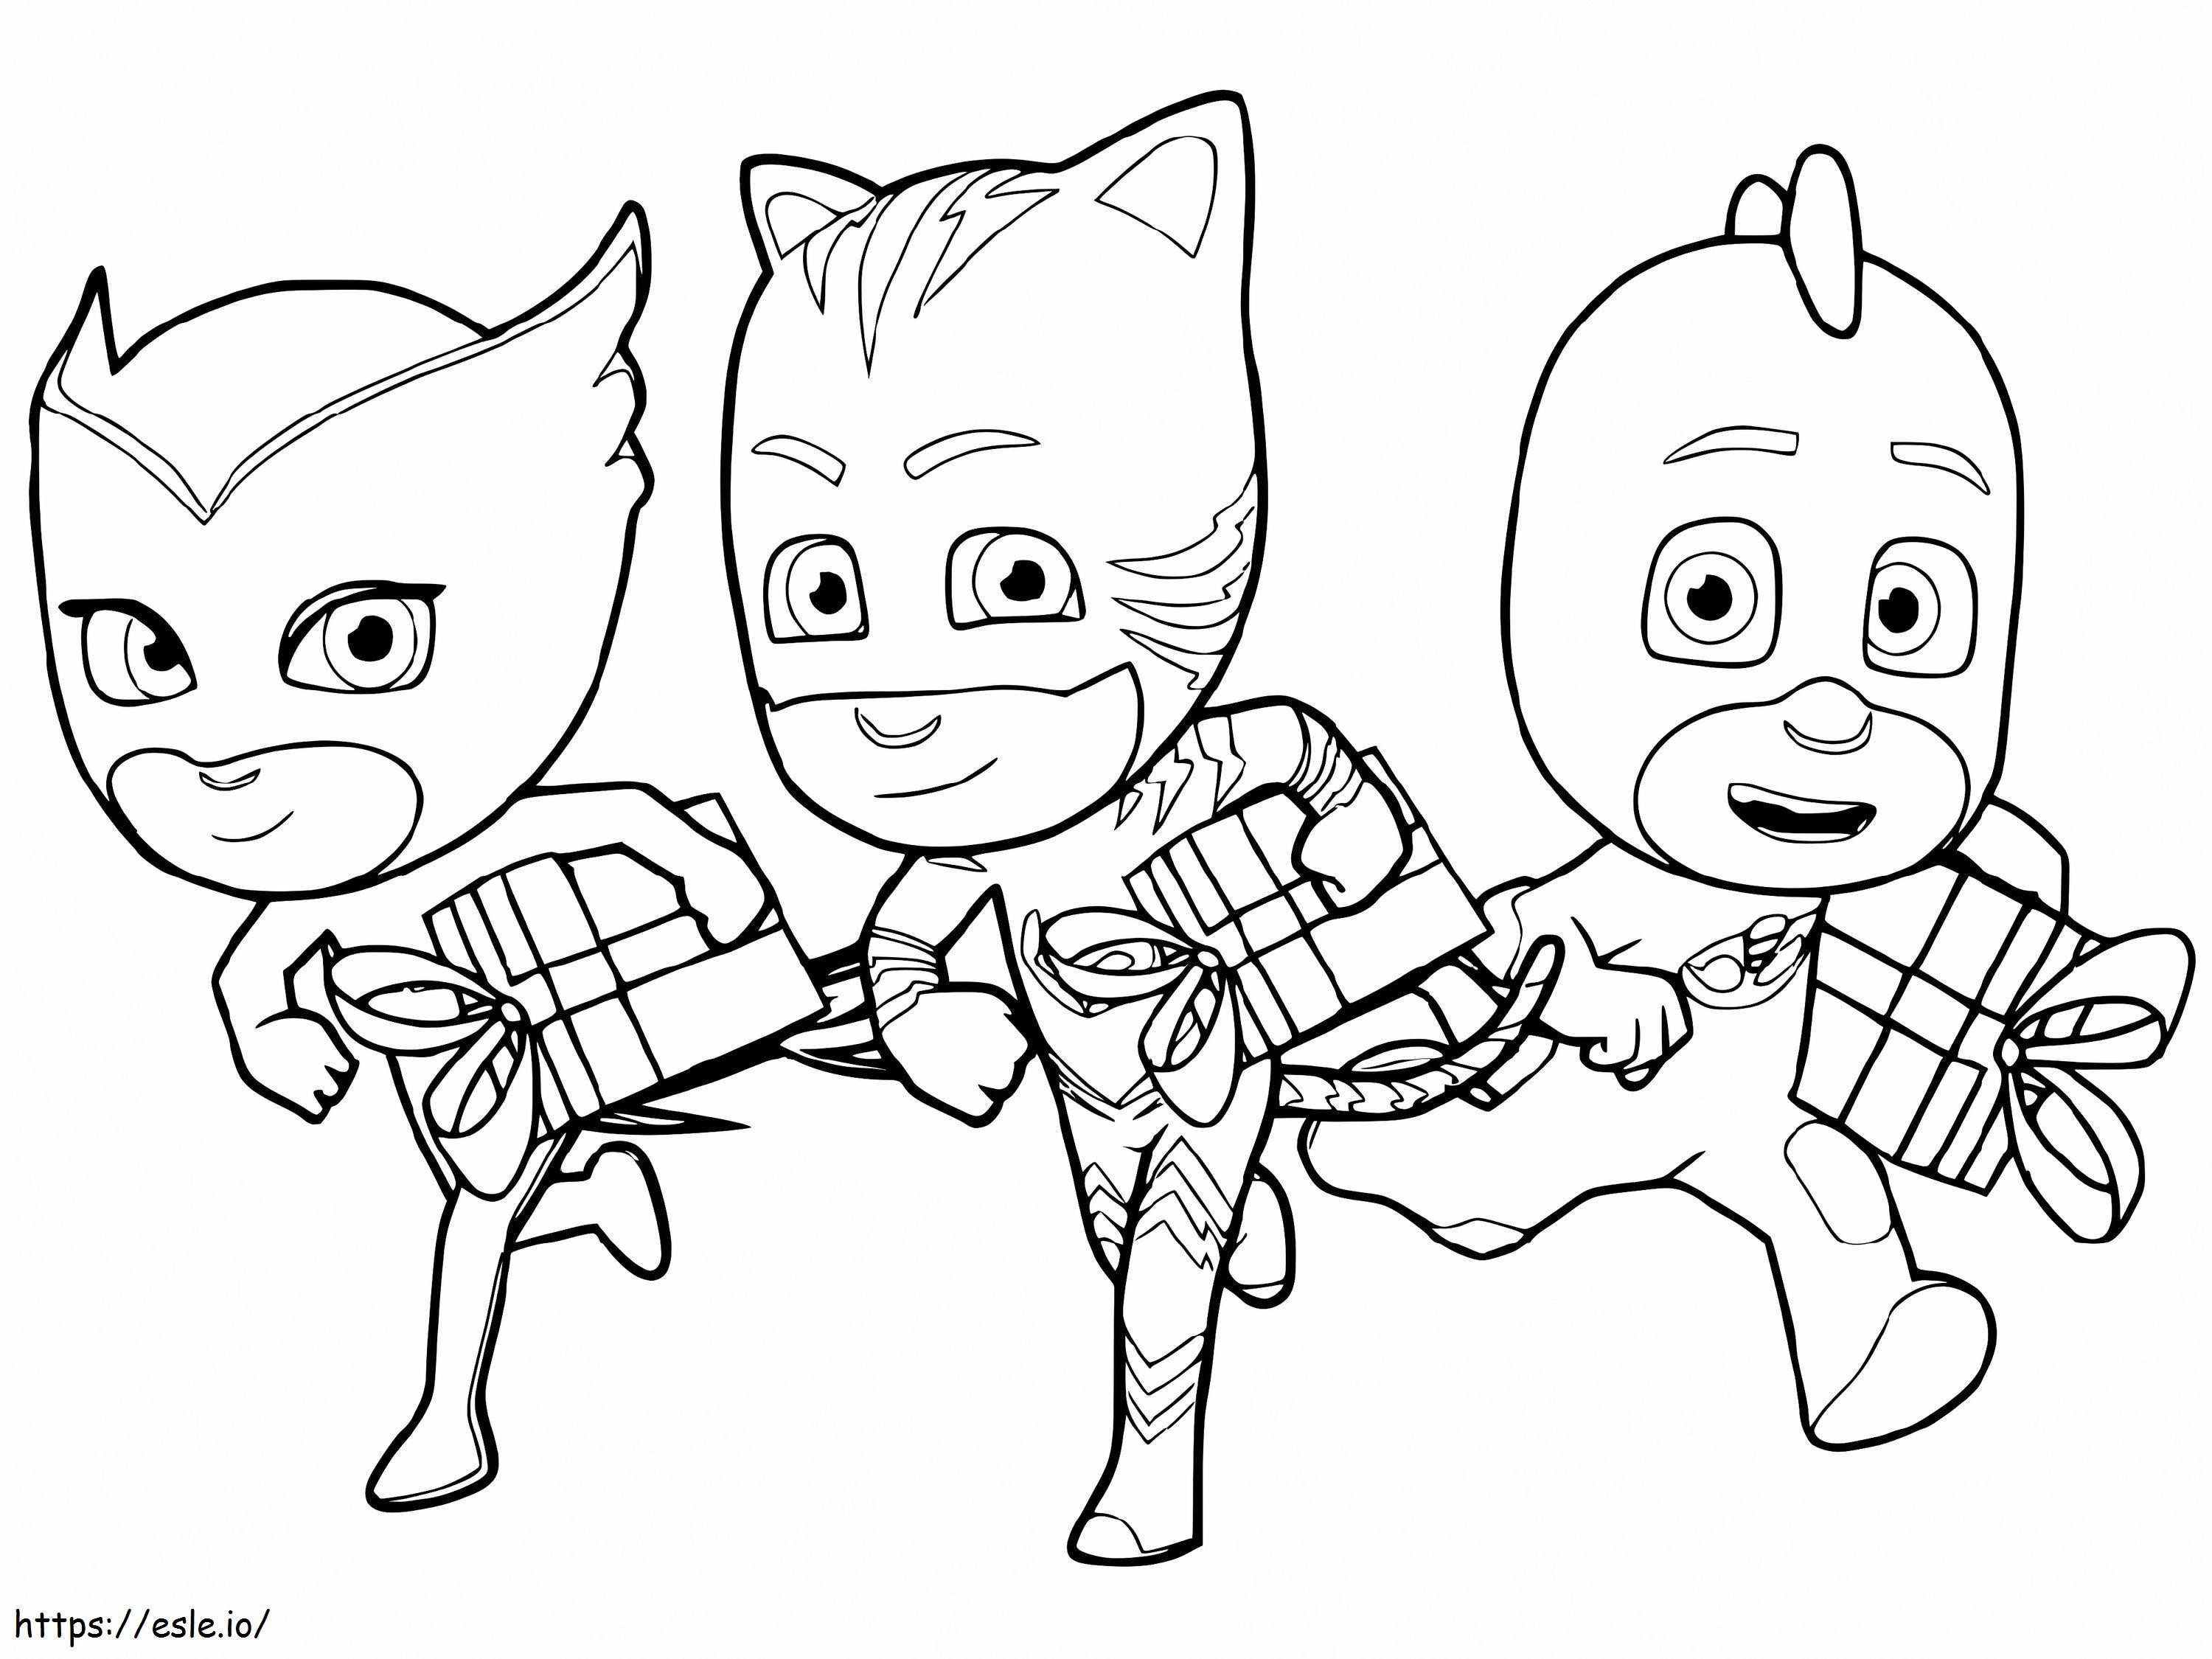 PJ Masks And Gifts coloring page